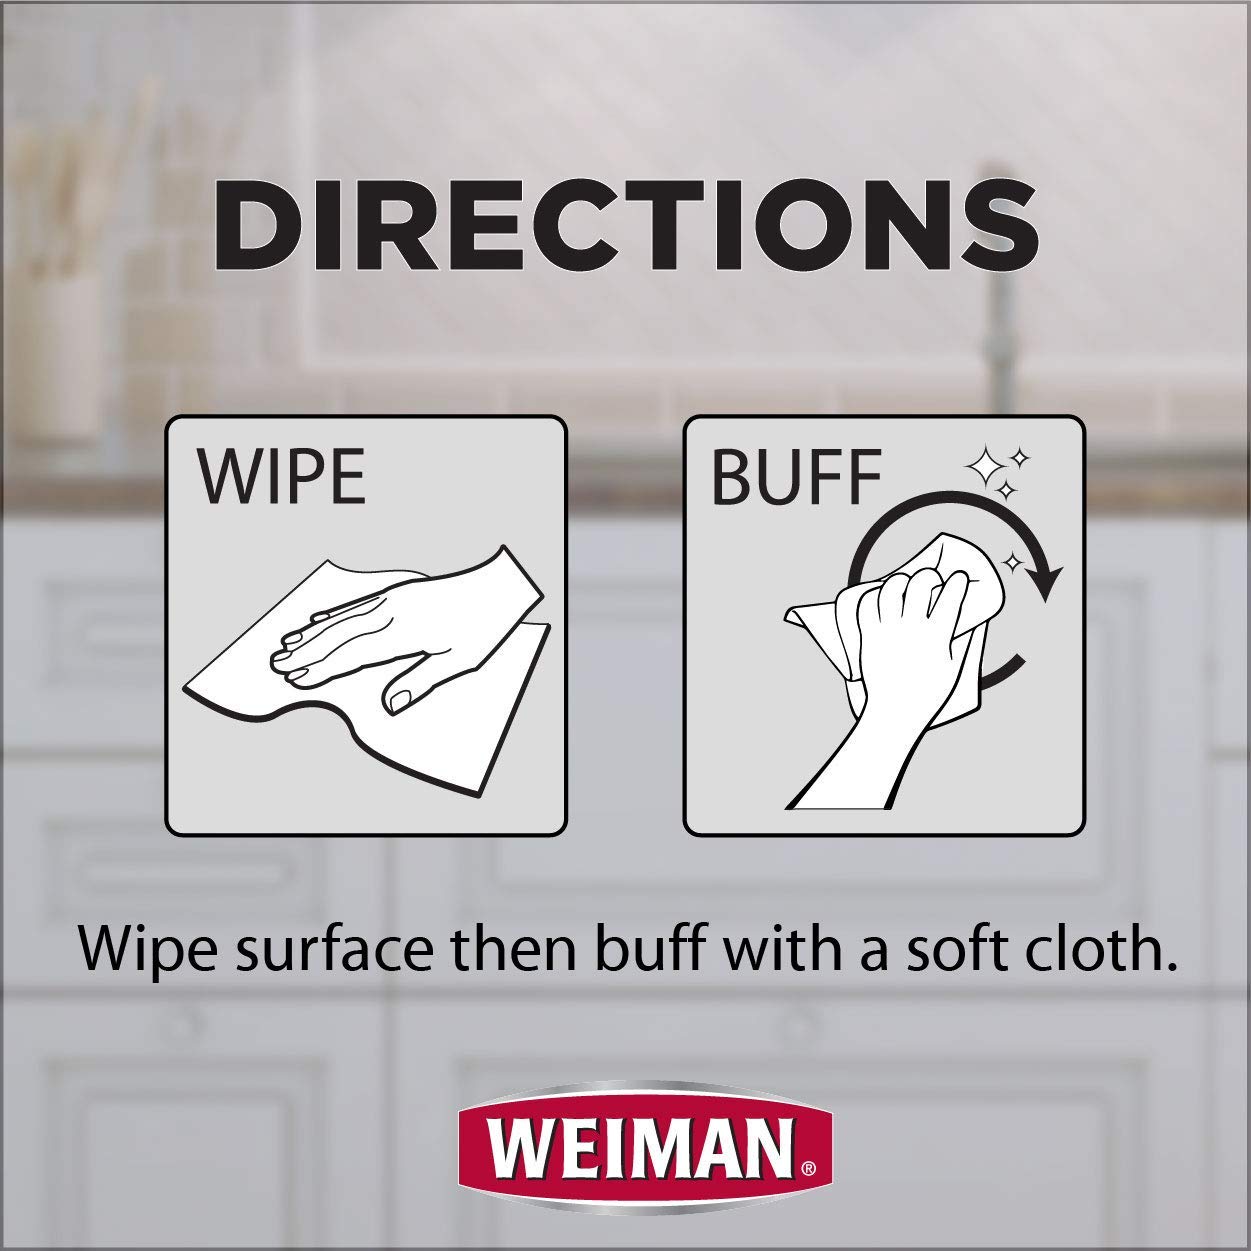 Weiman Wipes, Stainless Steel - 30 wipes